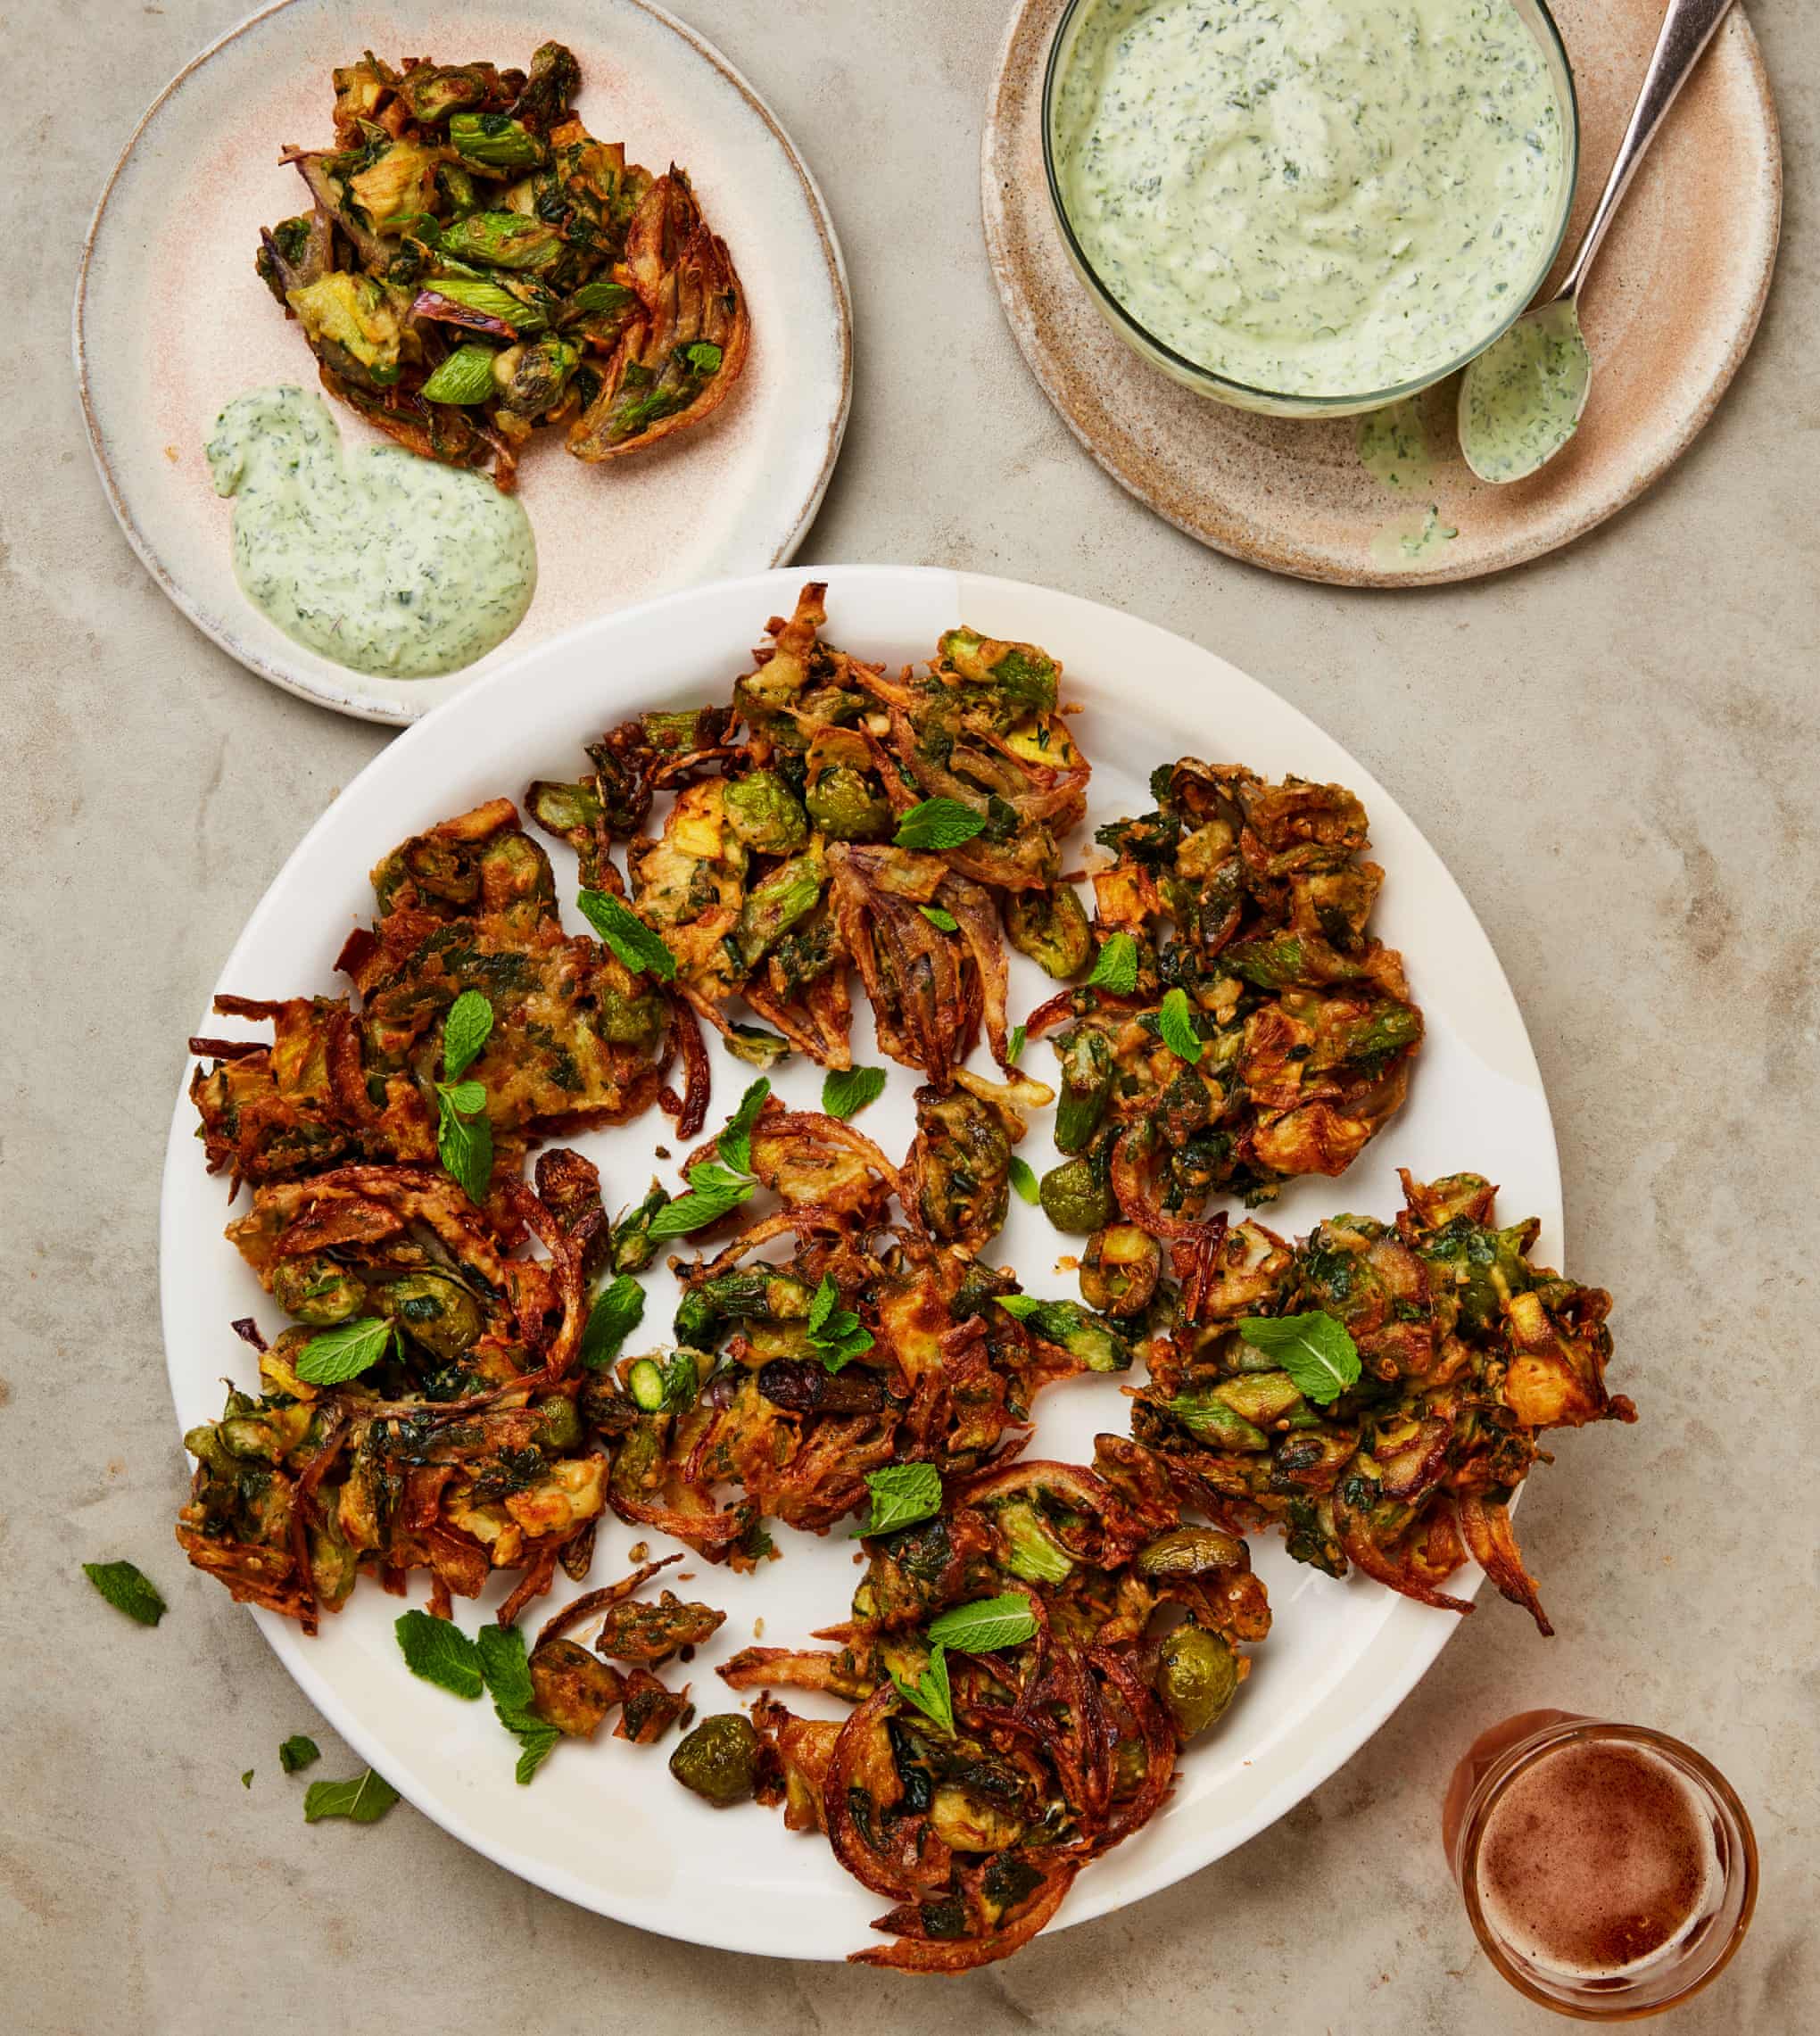 Yotam Ottolenghi’s recipes for spring vegetable fritters